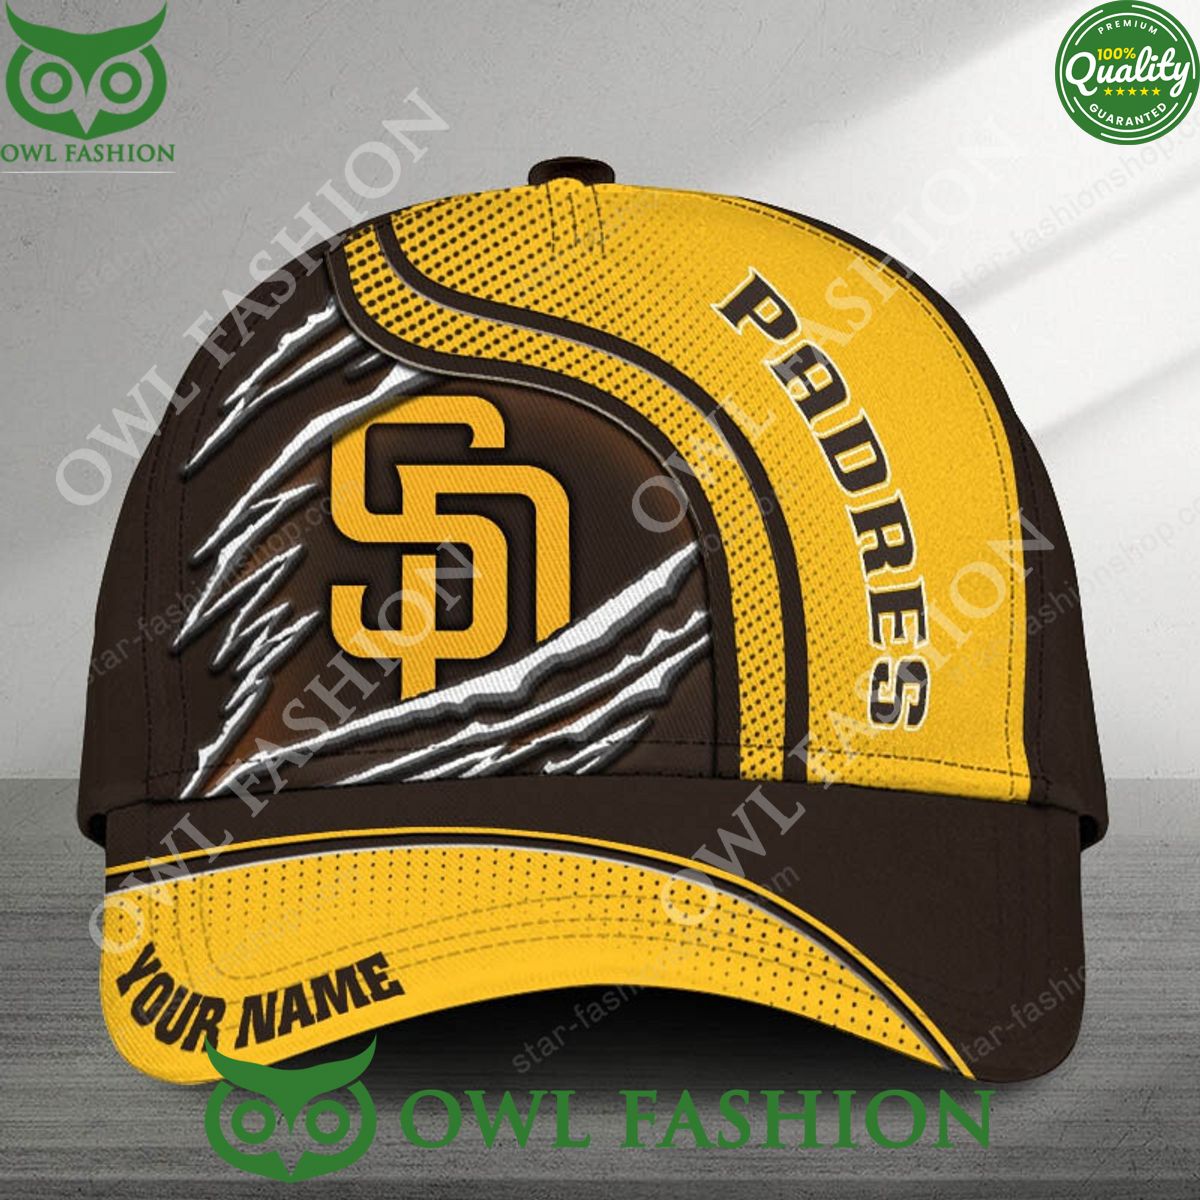 2024 San Diego Padres Custom Name MLB Printed Classic Cap Best picture ever